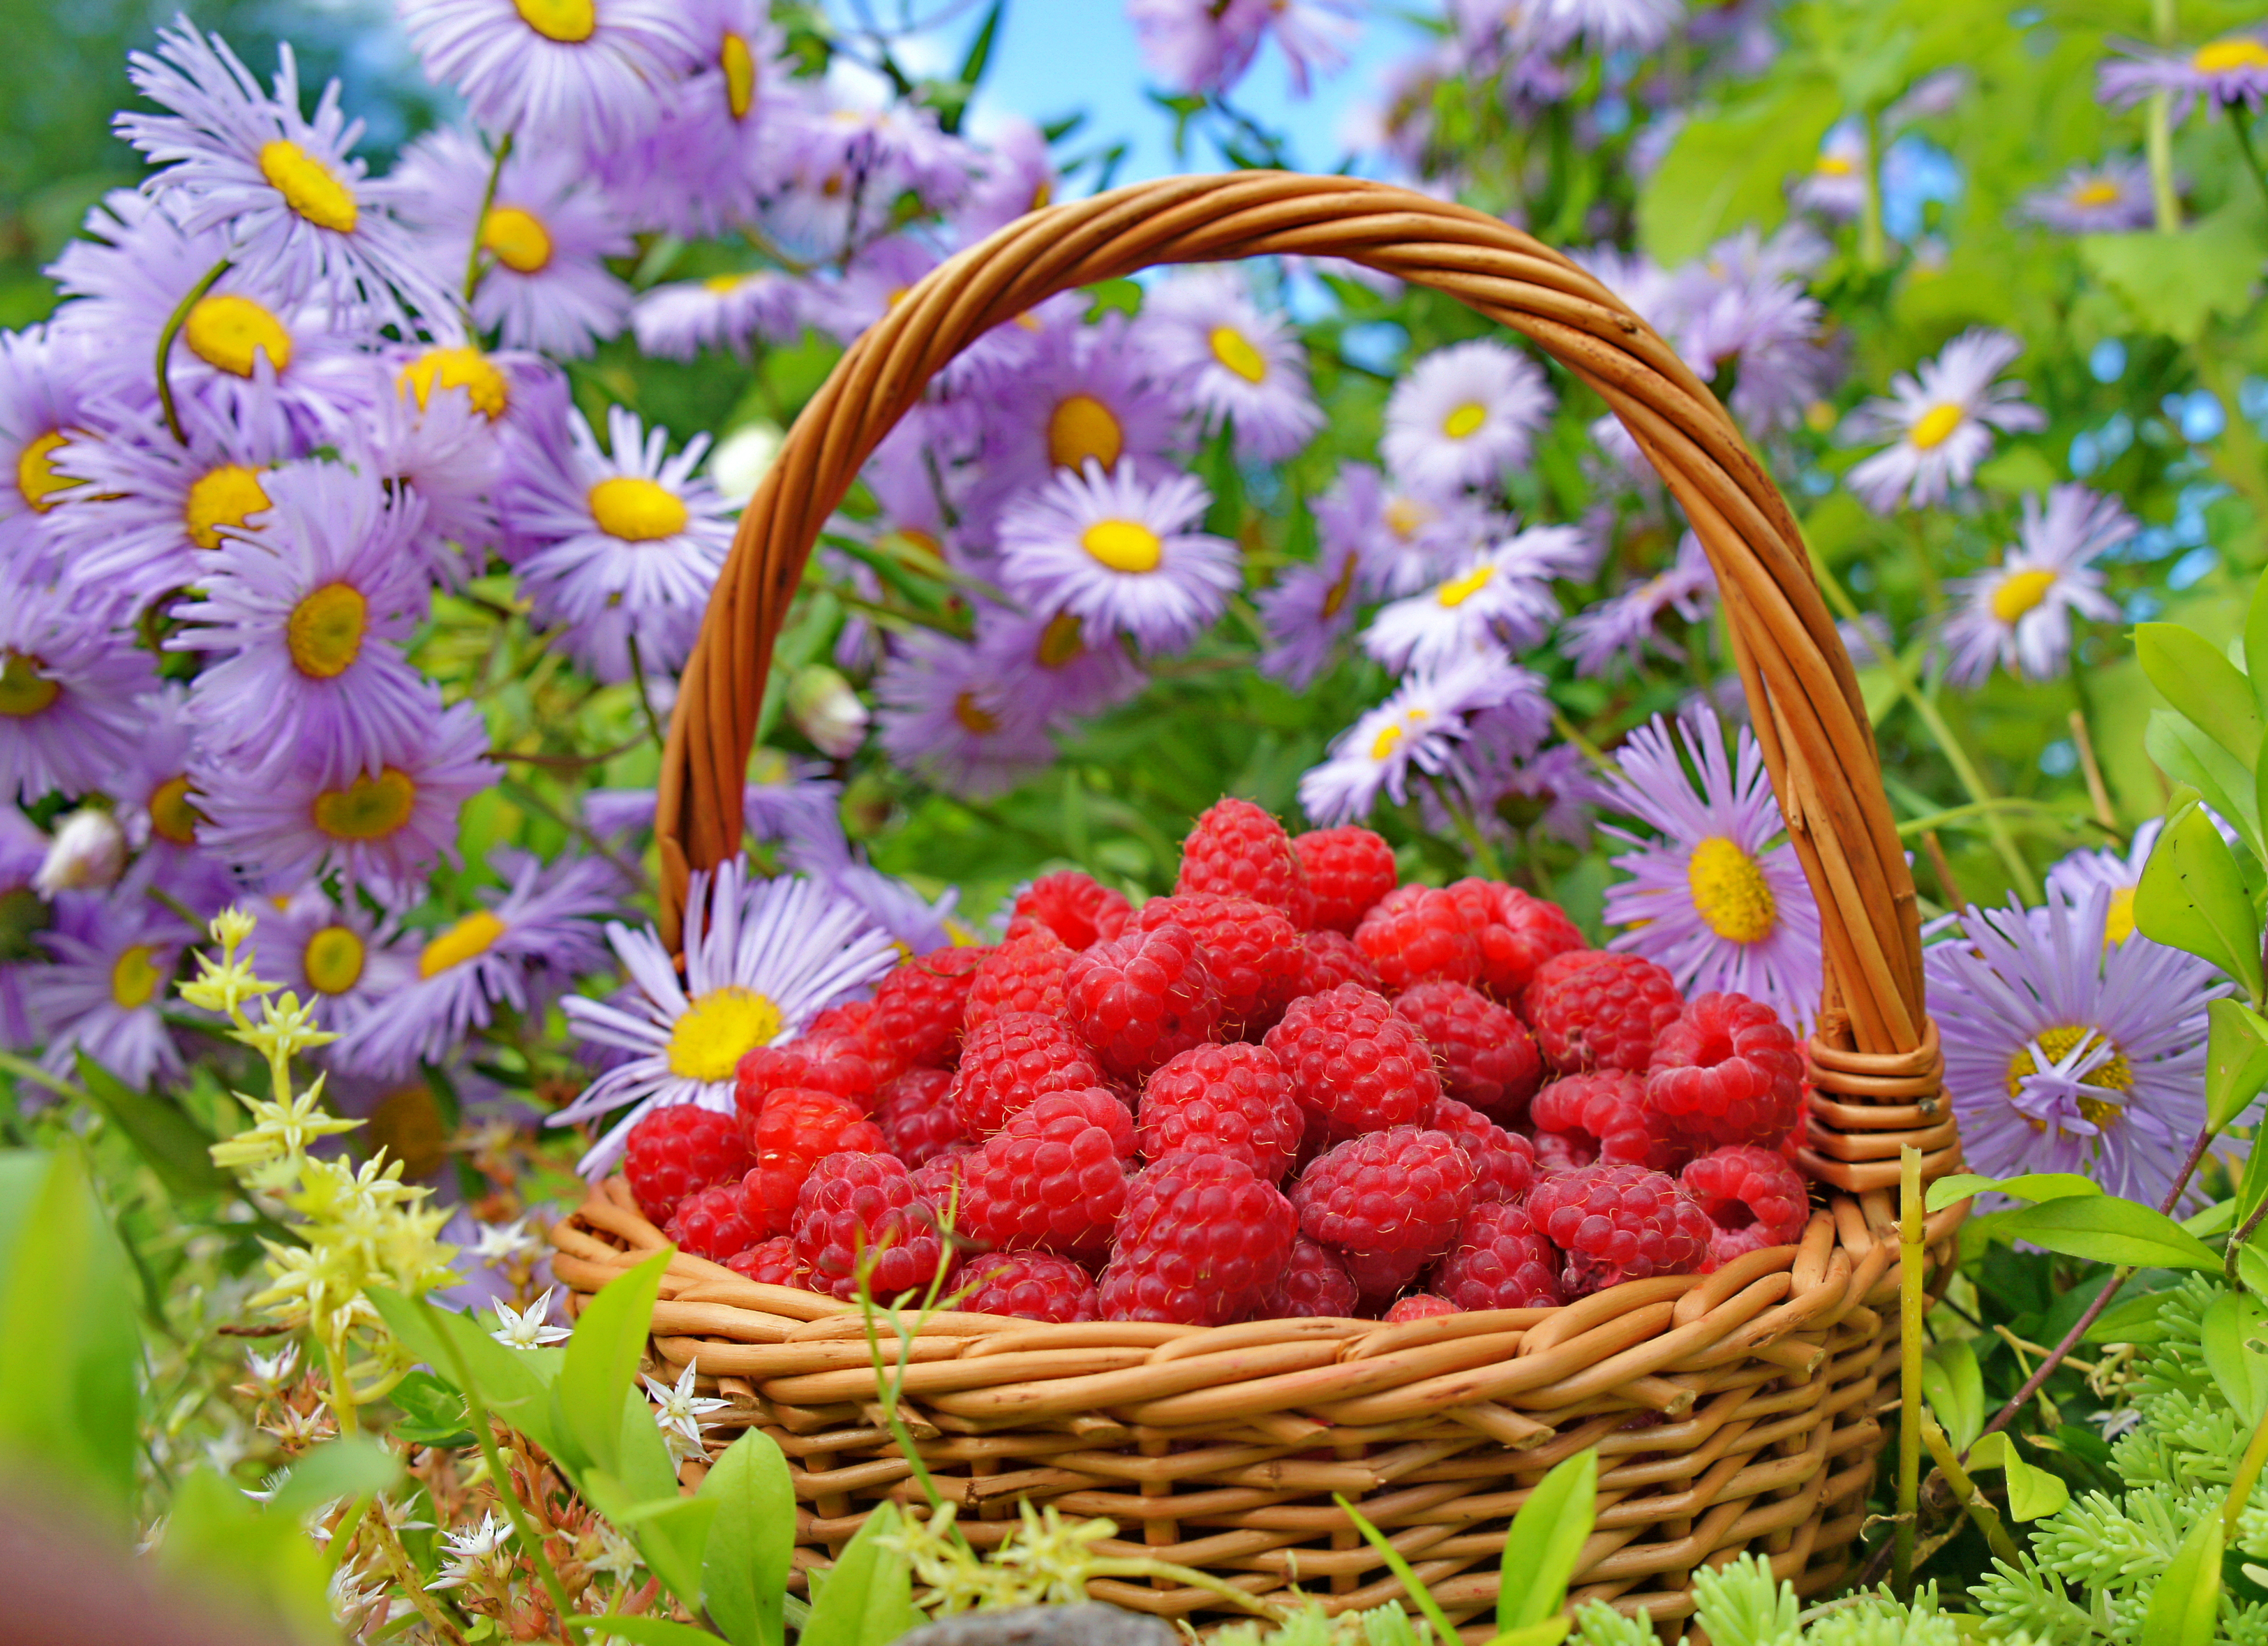 136938 download wallpaper flowers, food, raspberry, berries, basket screensavers and pictures for free